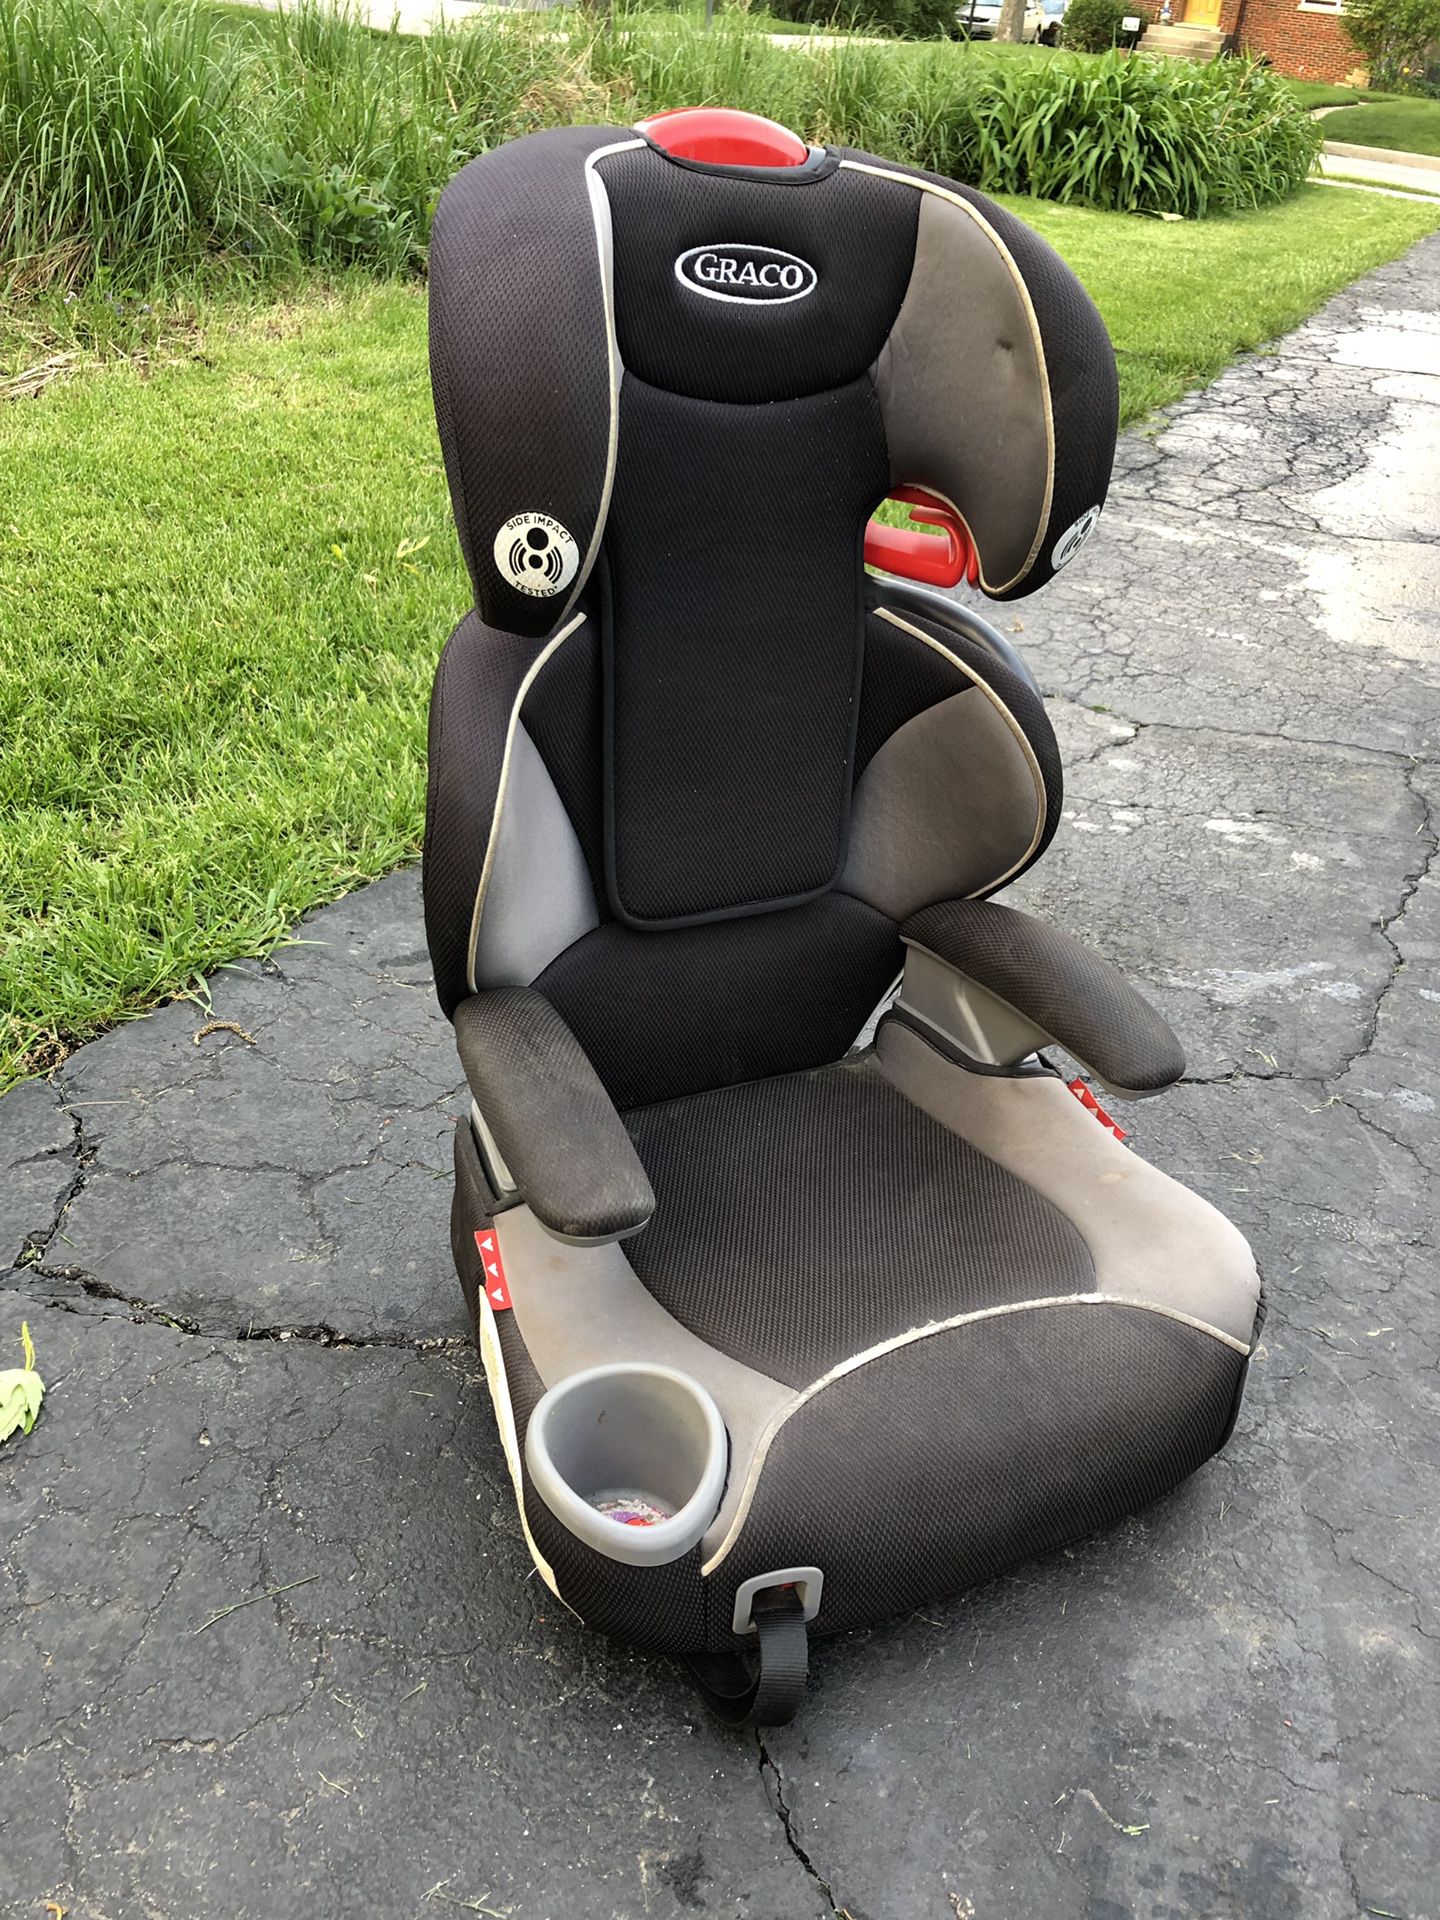 Graco car seat / booster seat